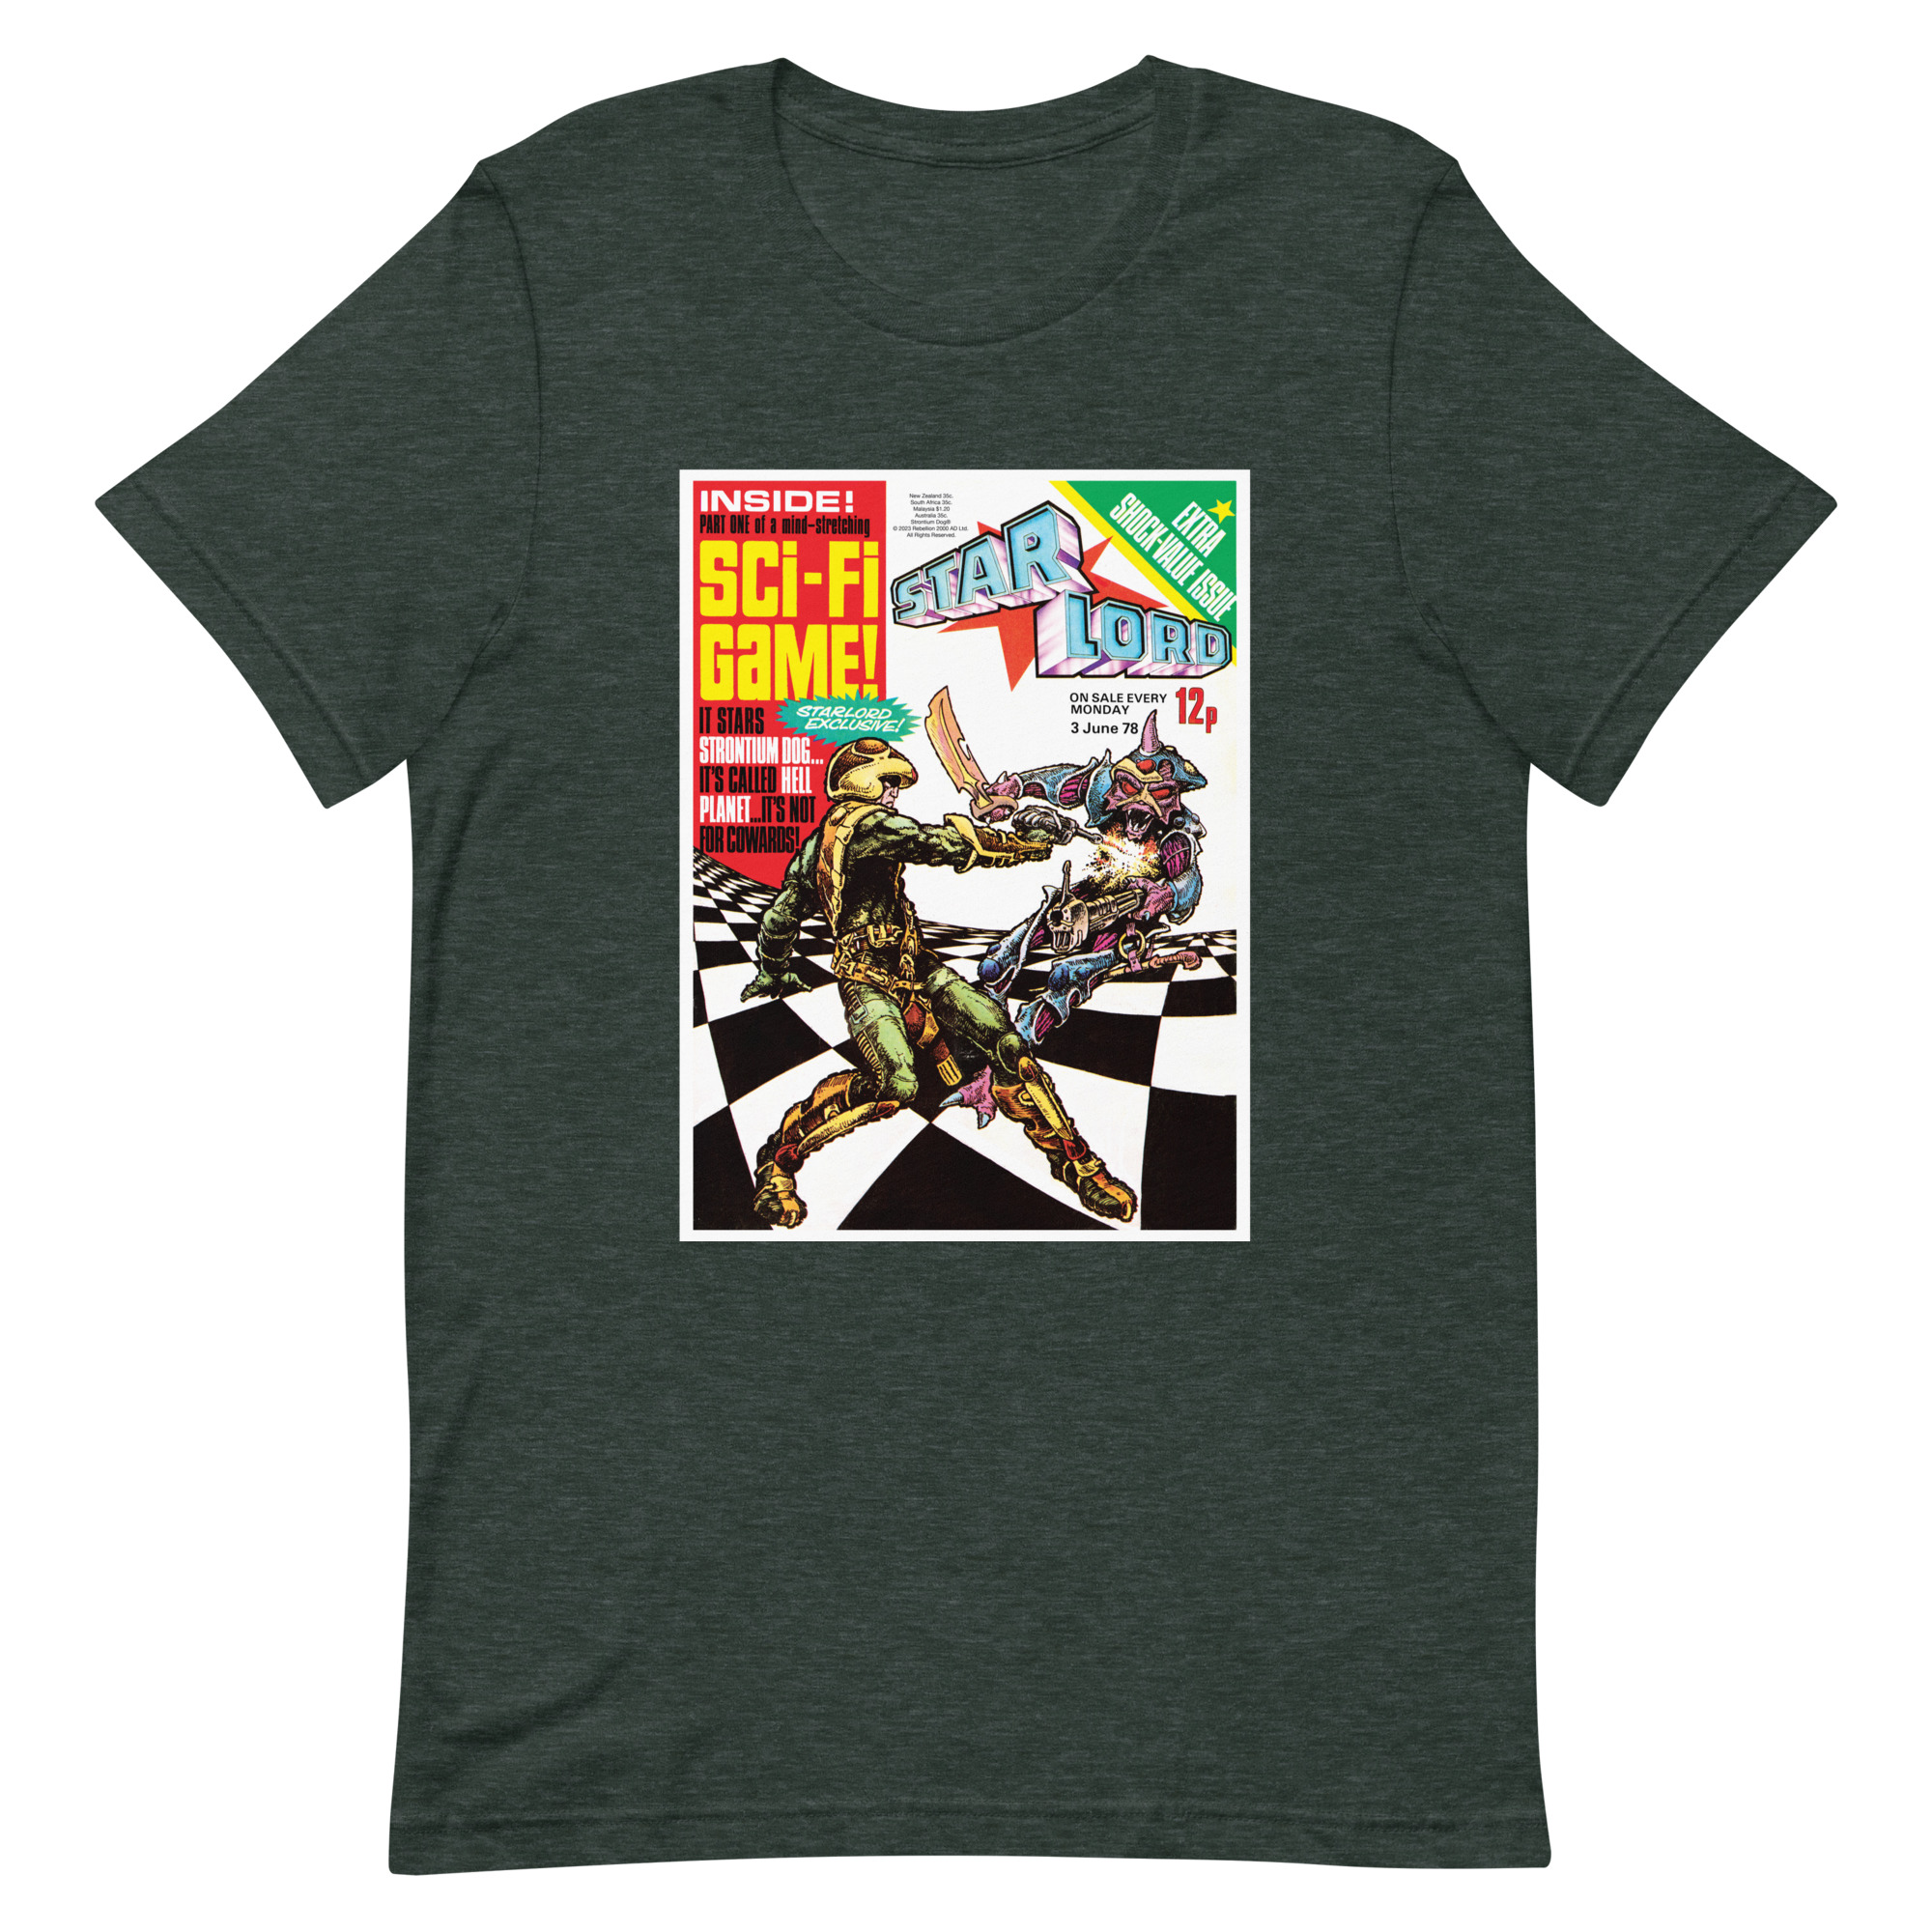 Green Tshirt depicting the cover of STARLORD from June '78, in which Johnny Alpha & an alien warrior battle it out over a chessboard pattern.